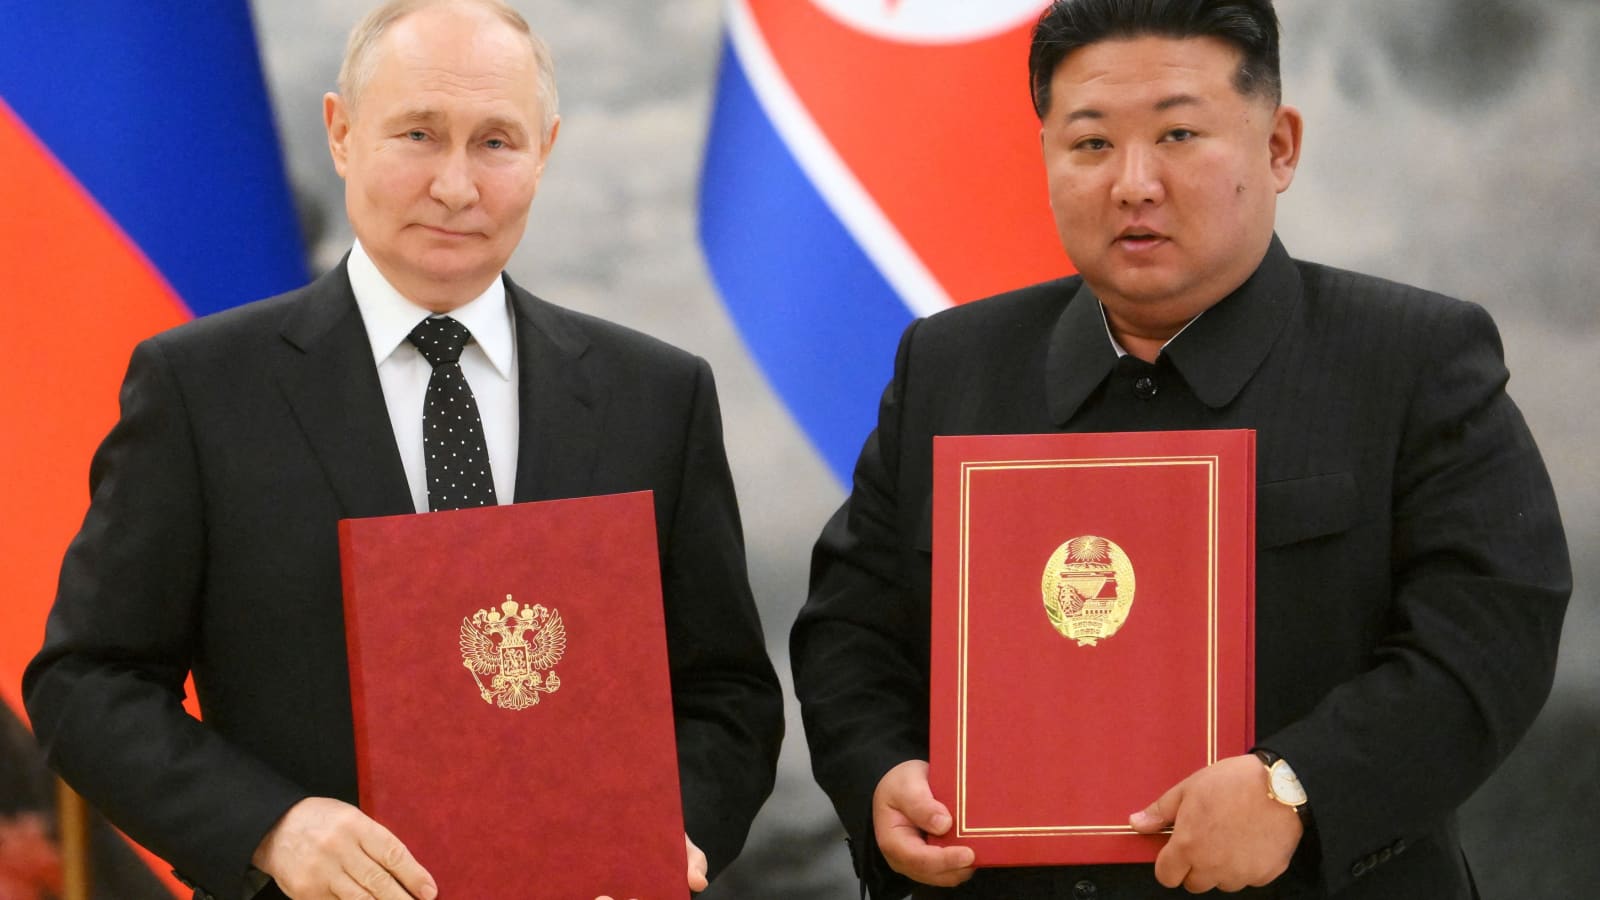 North Korea And Russia Sign Mutual Defense Pact, Strengthen Military Cooperation